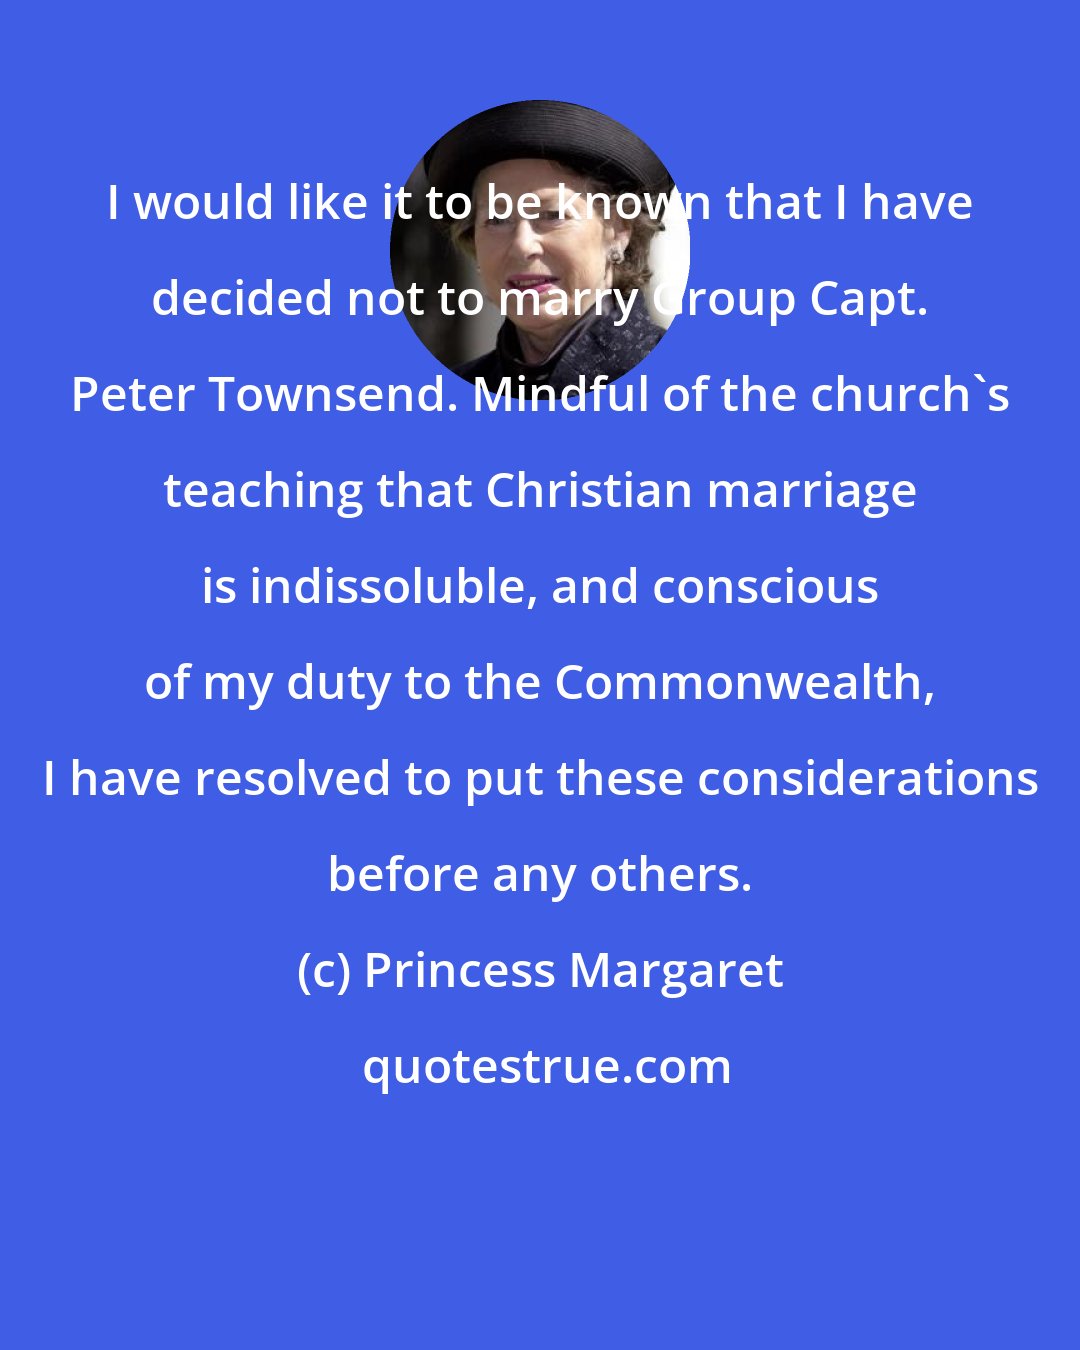 Princess Margaret: I would like it to be known that I have decided not to marry Group Capt. Peter Townsend. Mindful of the church's teaching that Christian marriage is indissoluble, and conscious of my duty to the Commonwealth, I have resolved to put these considerations before any others.